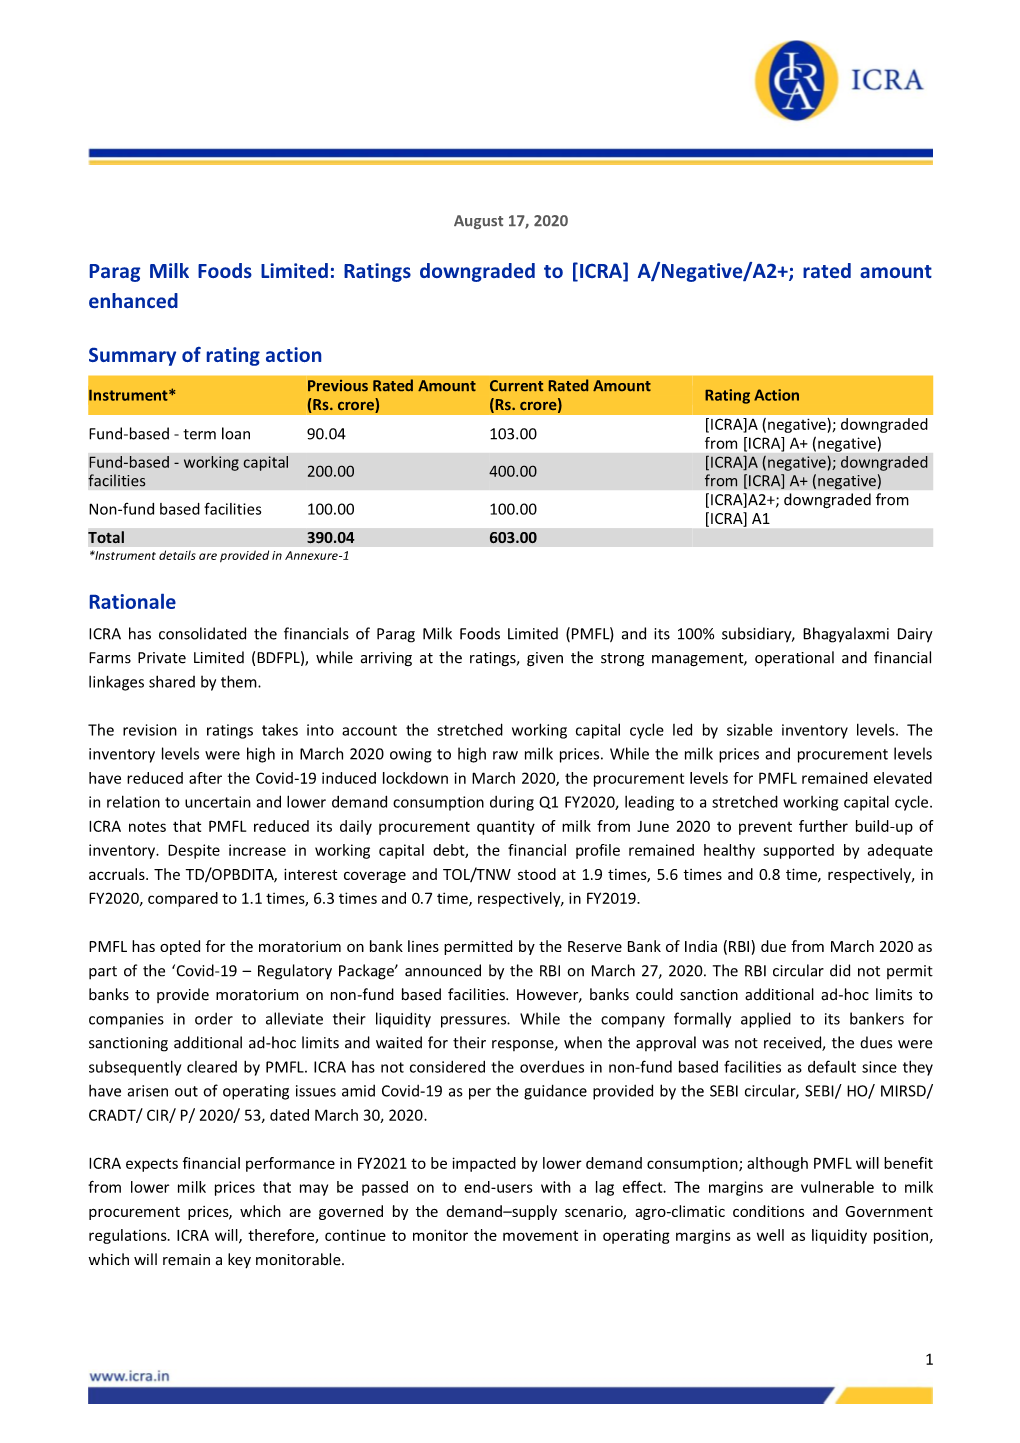 Parag Milk Foods Limited: Ratings Downgraded to [ICRA] A/Negative/A2+; Rated Amount Enhanced